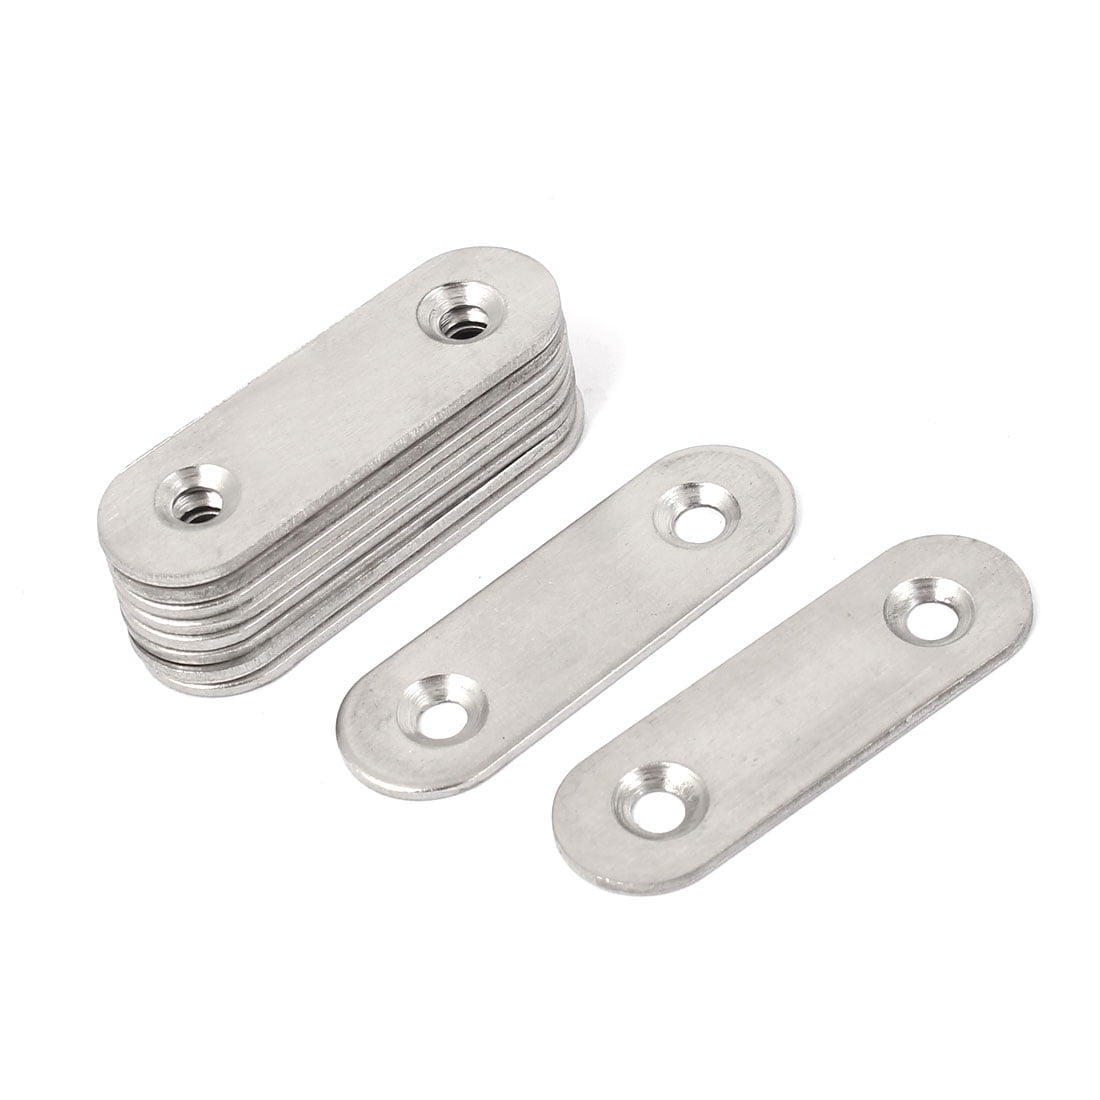 QTY 5 316 Stainless Steel Joist Hangers JUS26 LUS26 Deck Framing 2 x 6 Single 